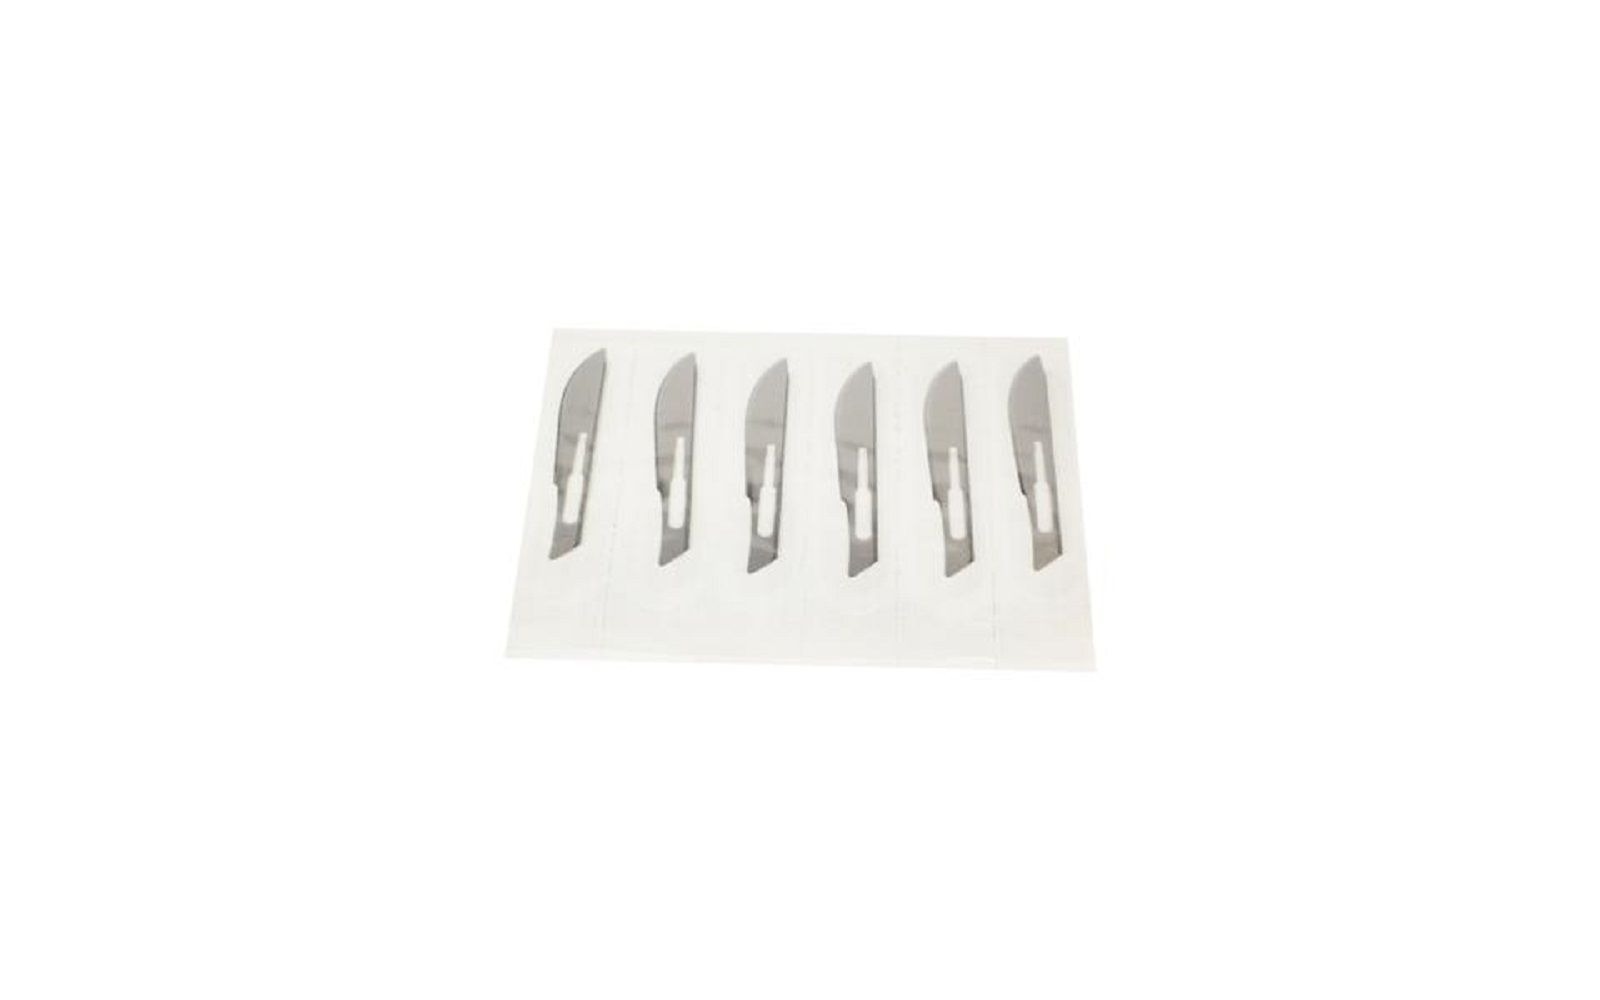 Carbon steel blades and handle – nonsterile, 6/pkg - 22